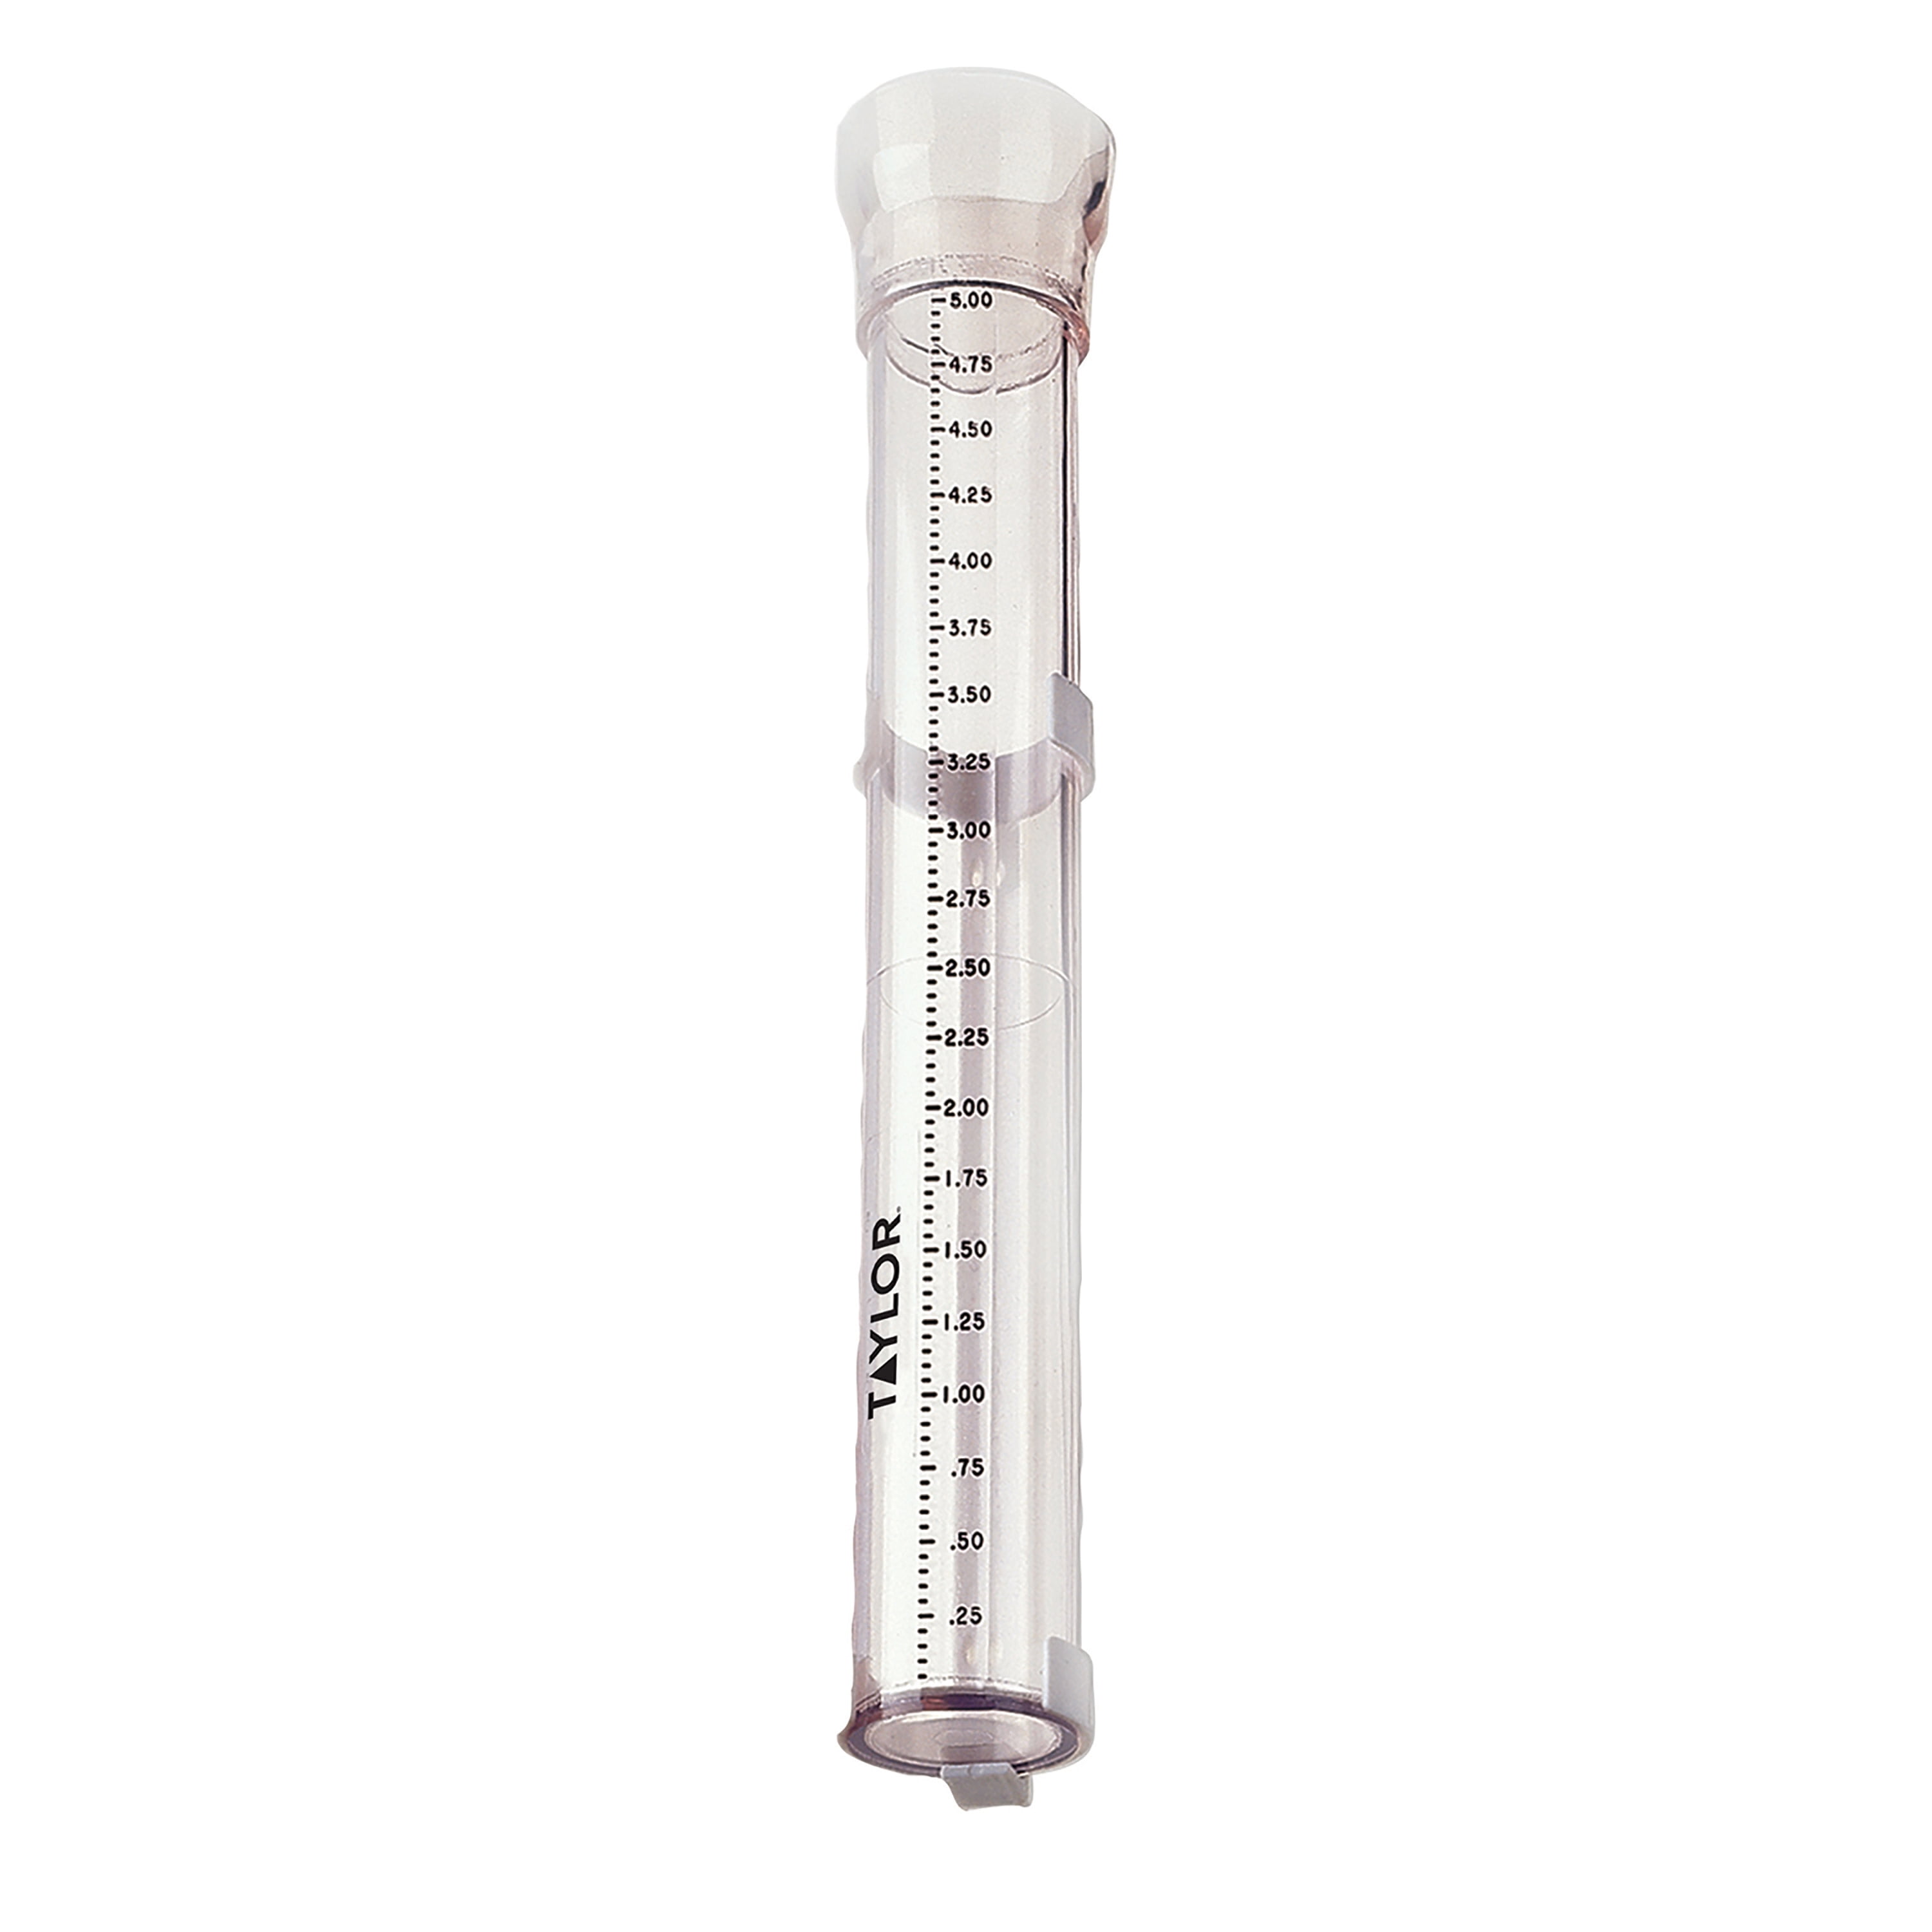 1 Clear Taylor Precision Products ClearVu Rain Gauge 